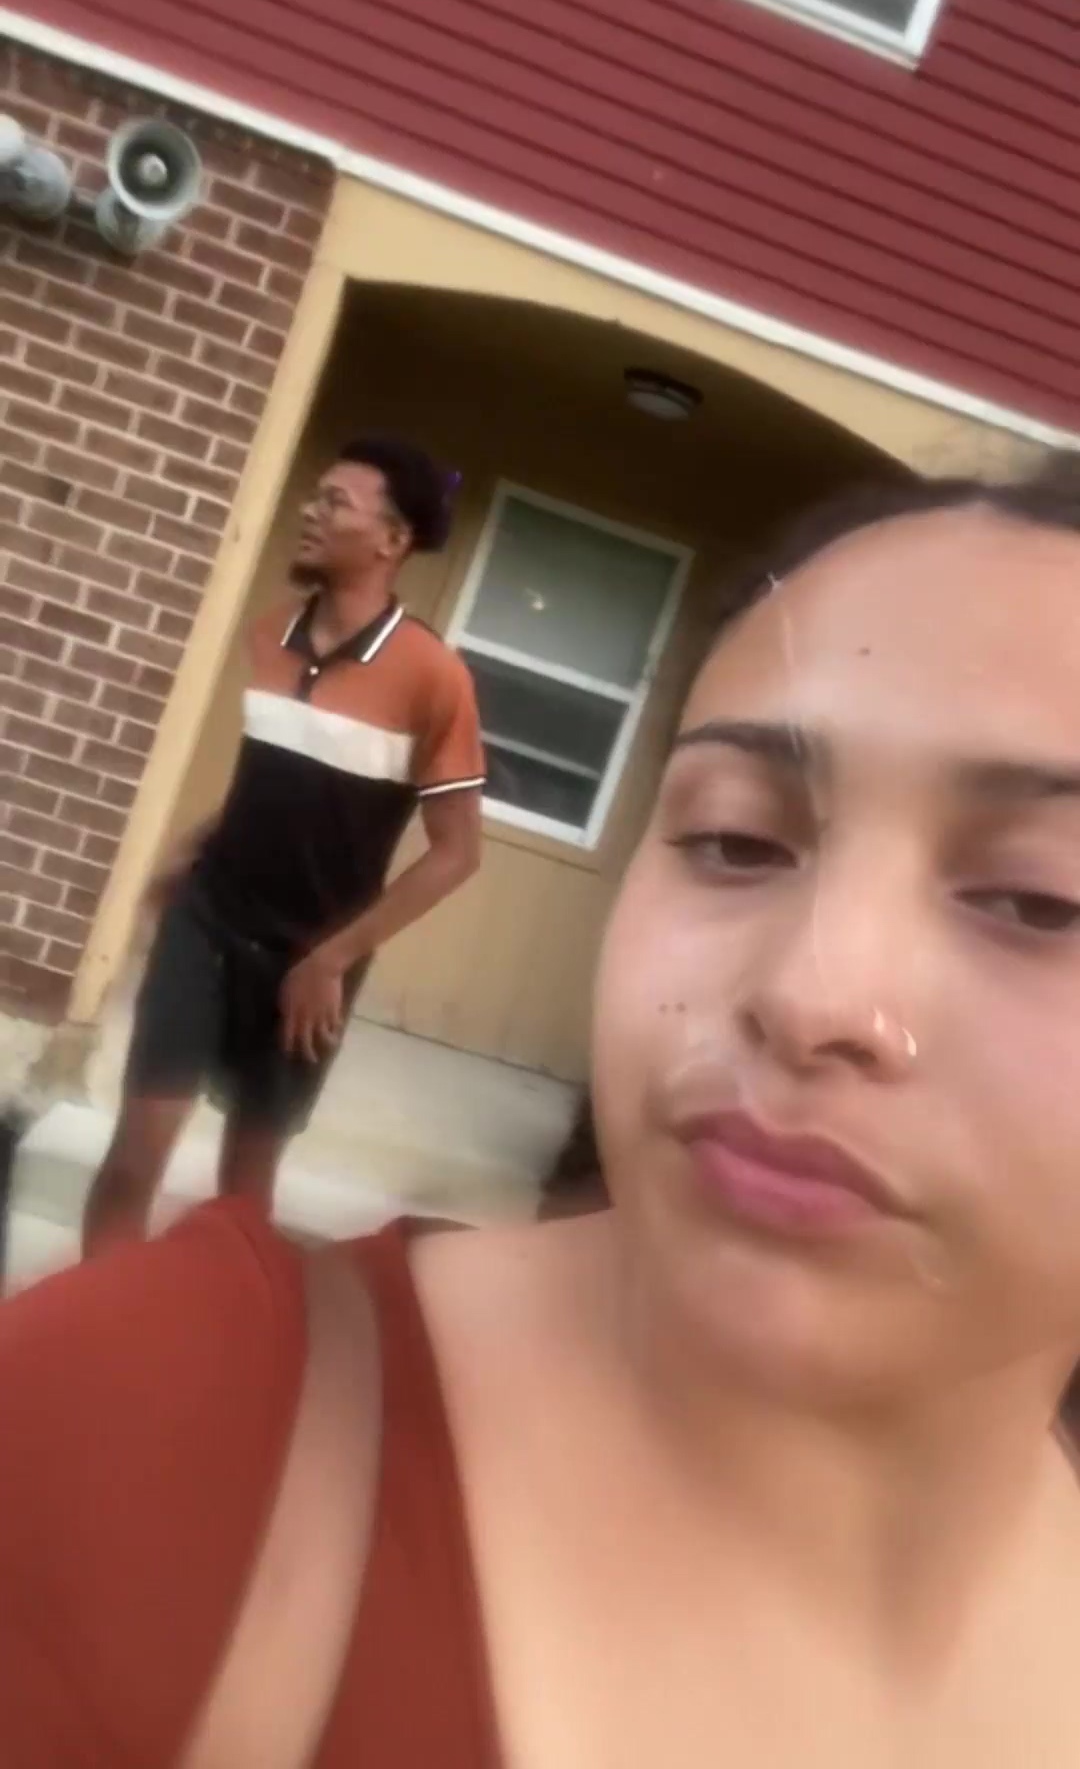 Latina BBW Enjoys Her Neighbors BBC And Takes On Camera Her Cum-covered Face To Surprise Her Hubby